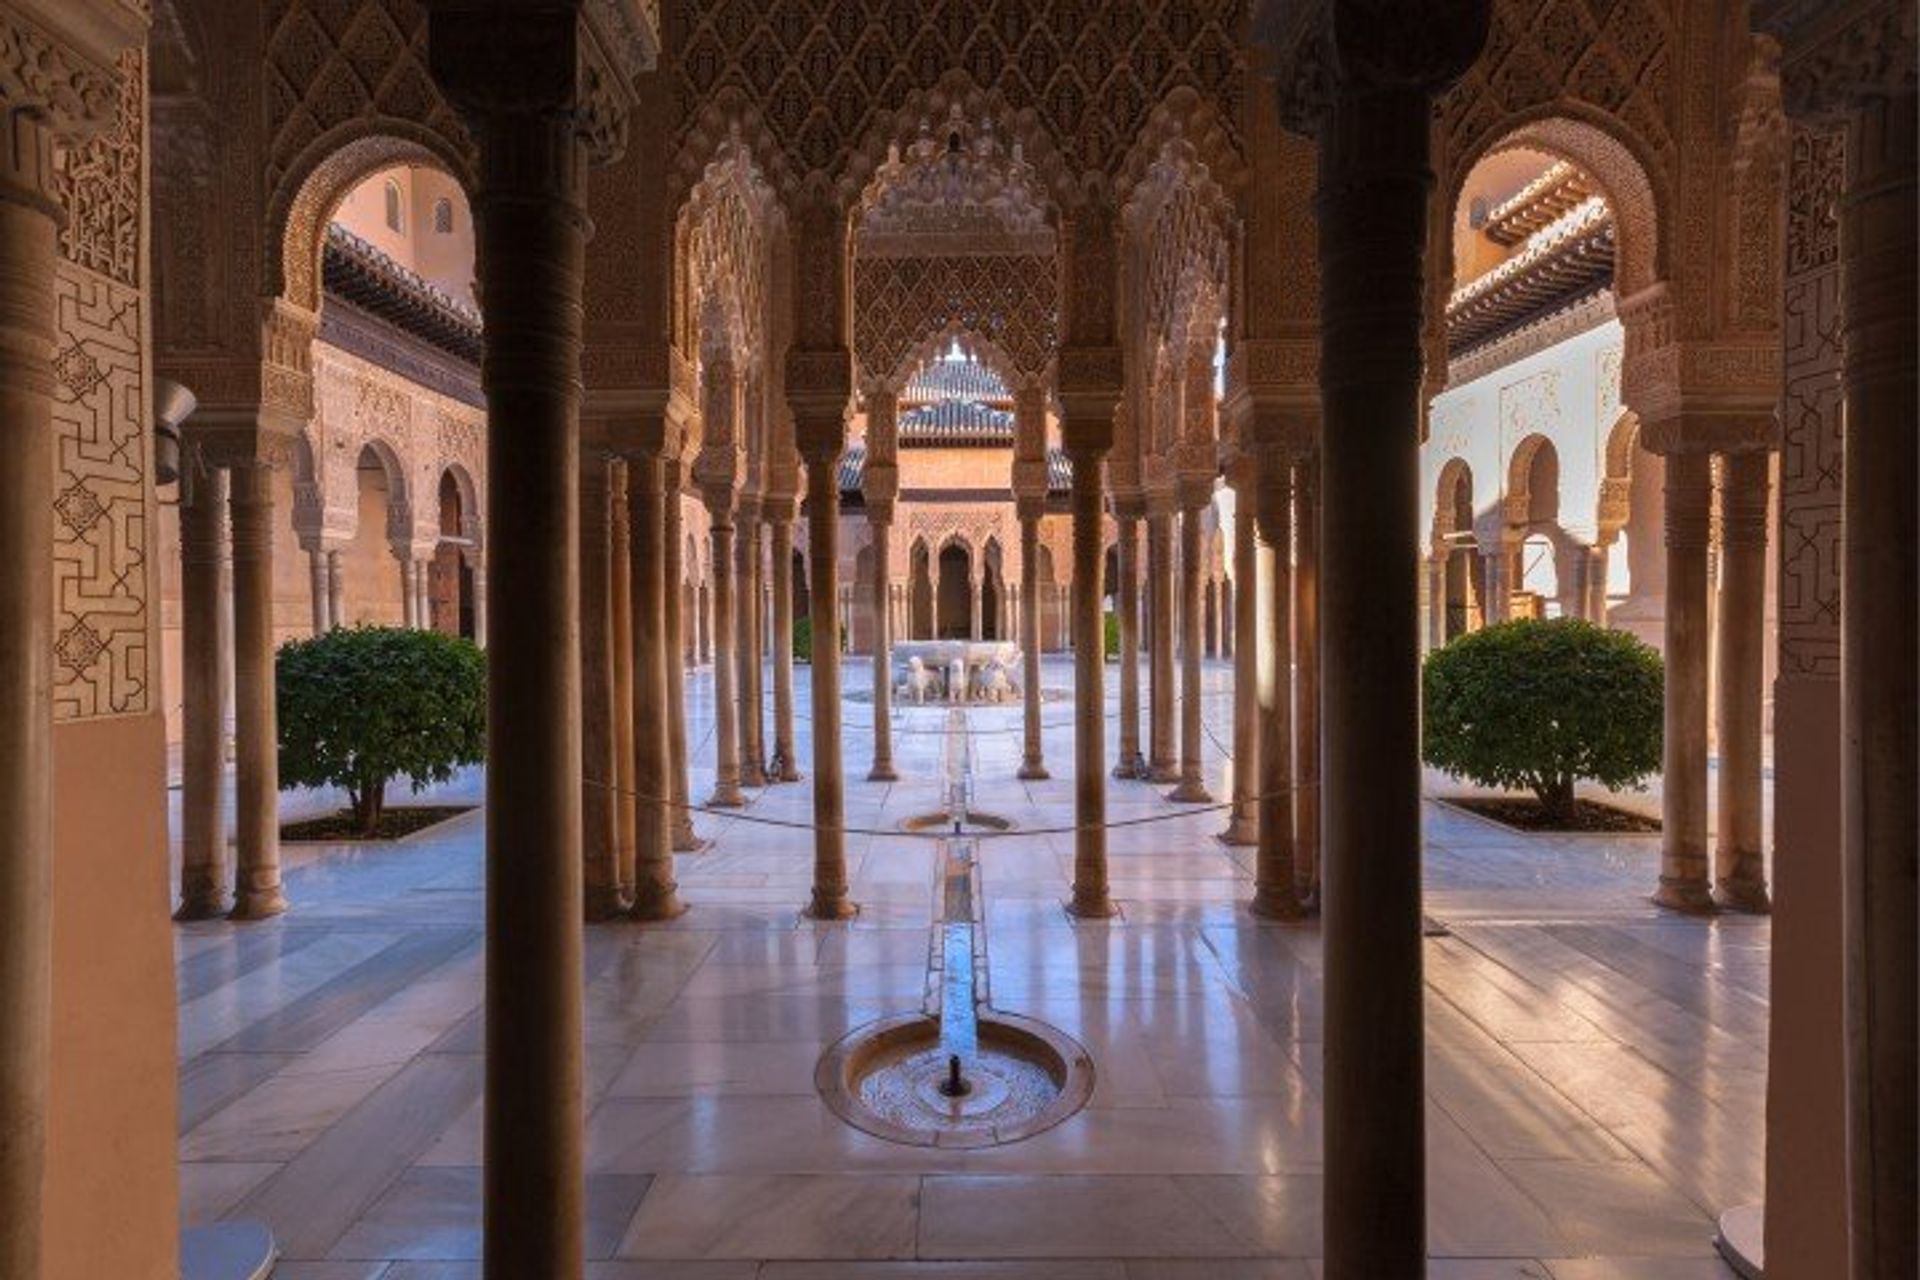 The Alhambra palace in Granada is one of the most beautiful architectural wonders in Spain